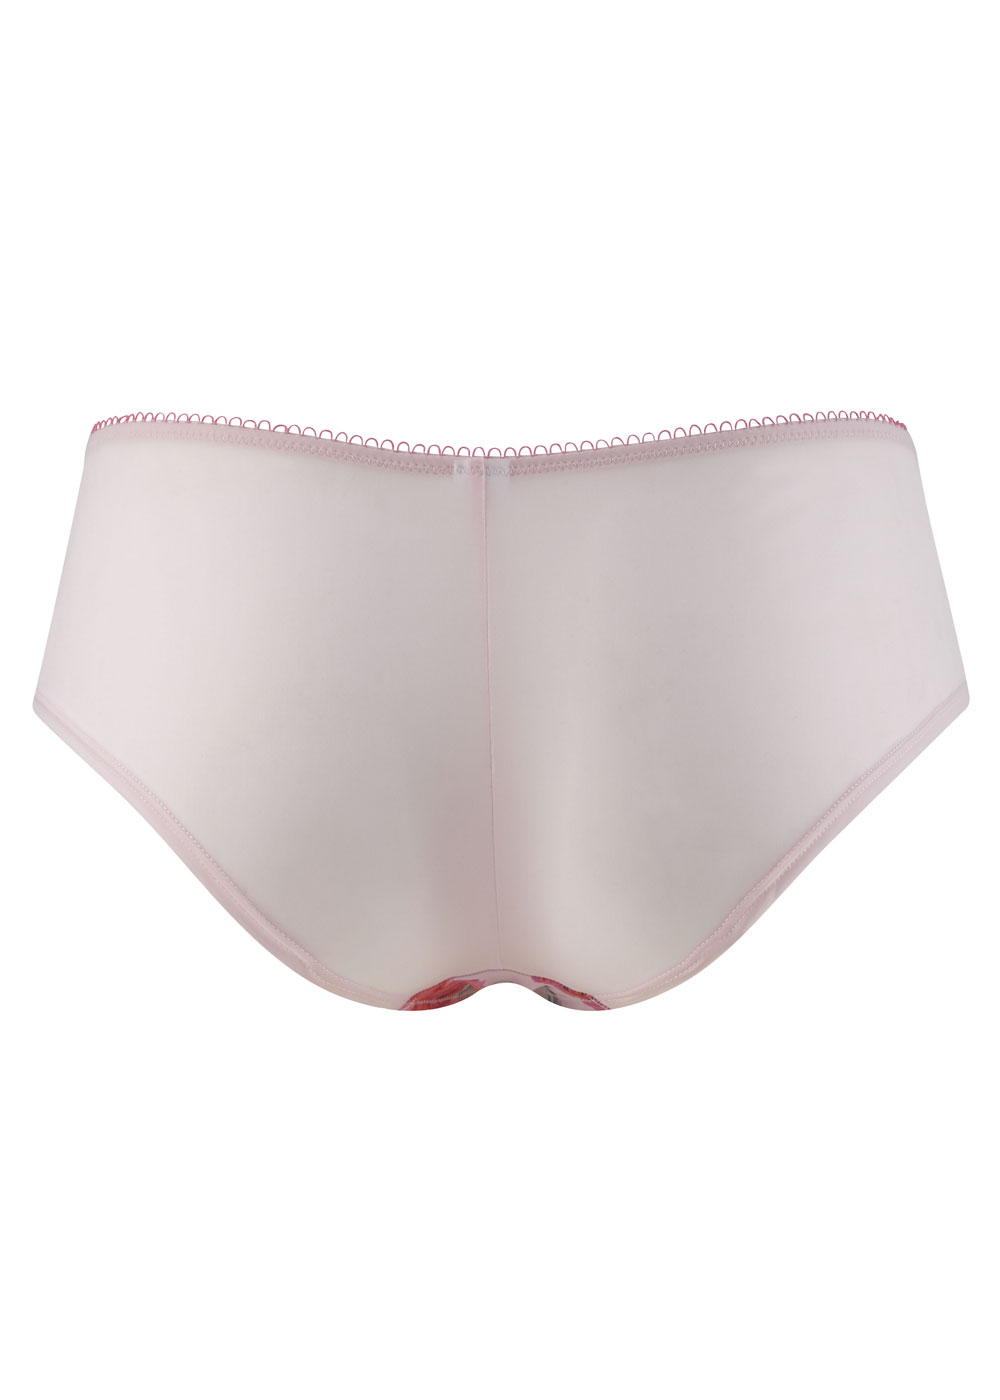 Culotte Cleo by Panache Floral